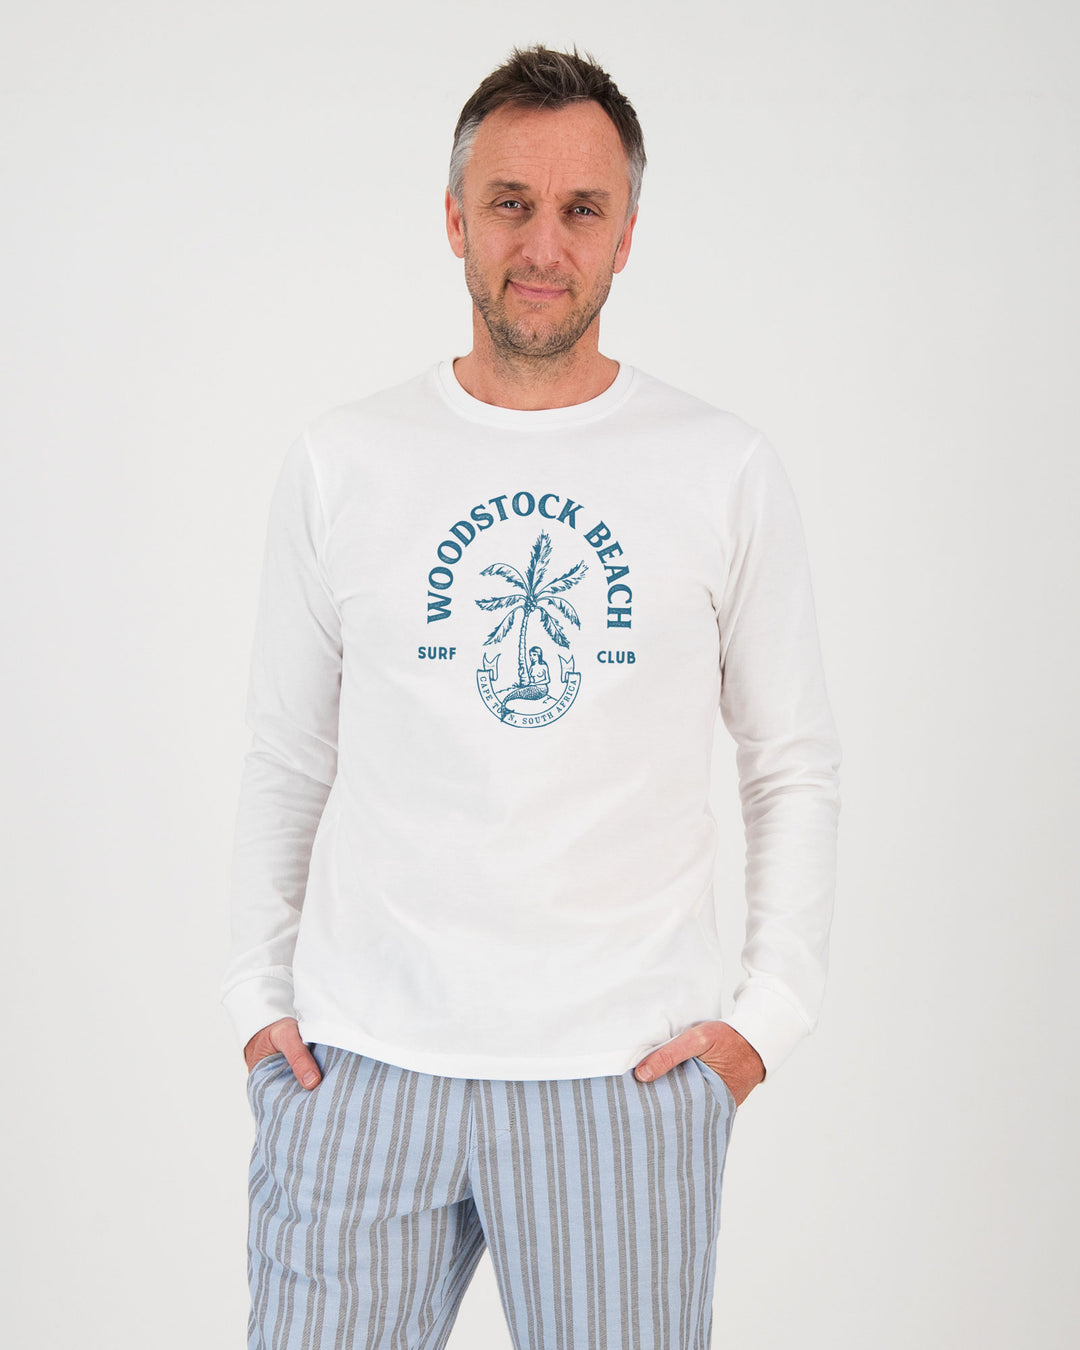 Mens Long-Sleeve White T-Shirt Surf Club Front - Woodstock Laundry